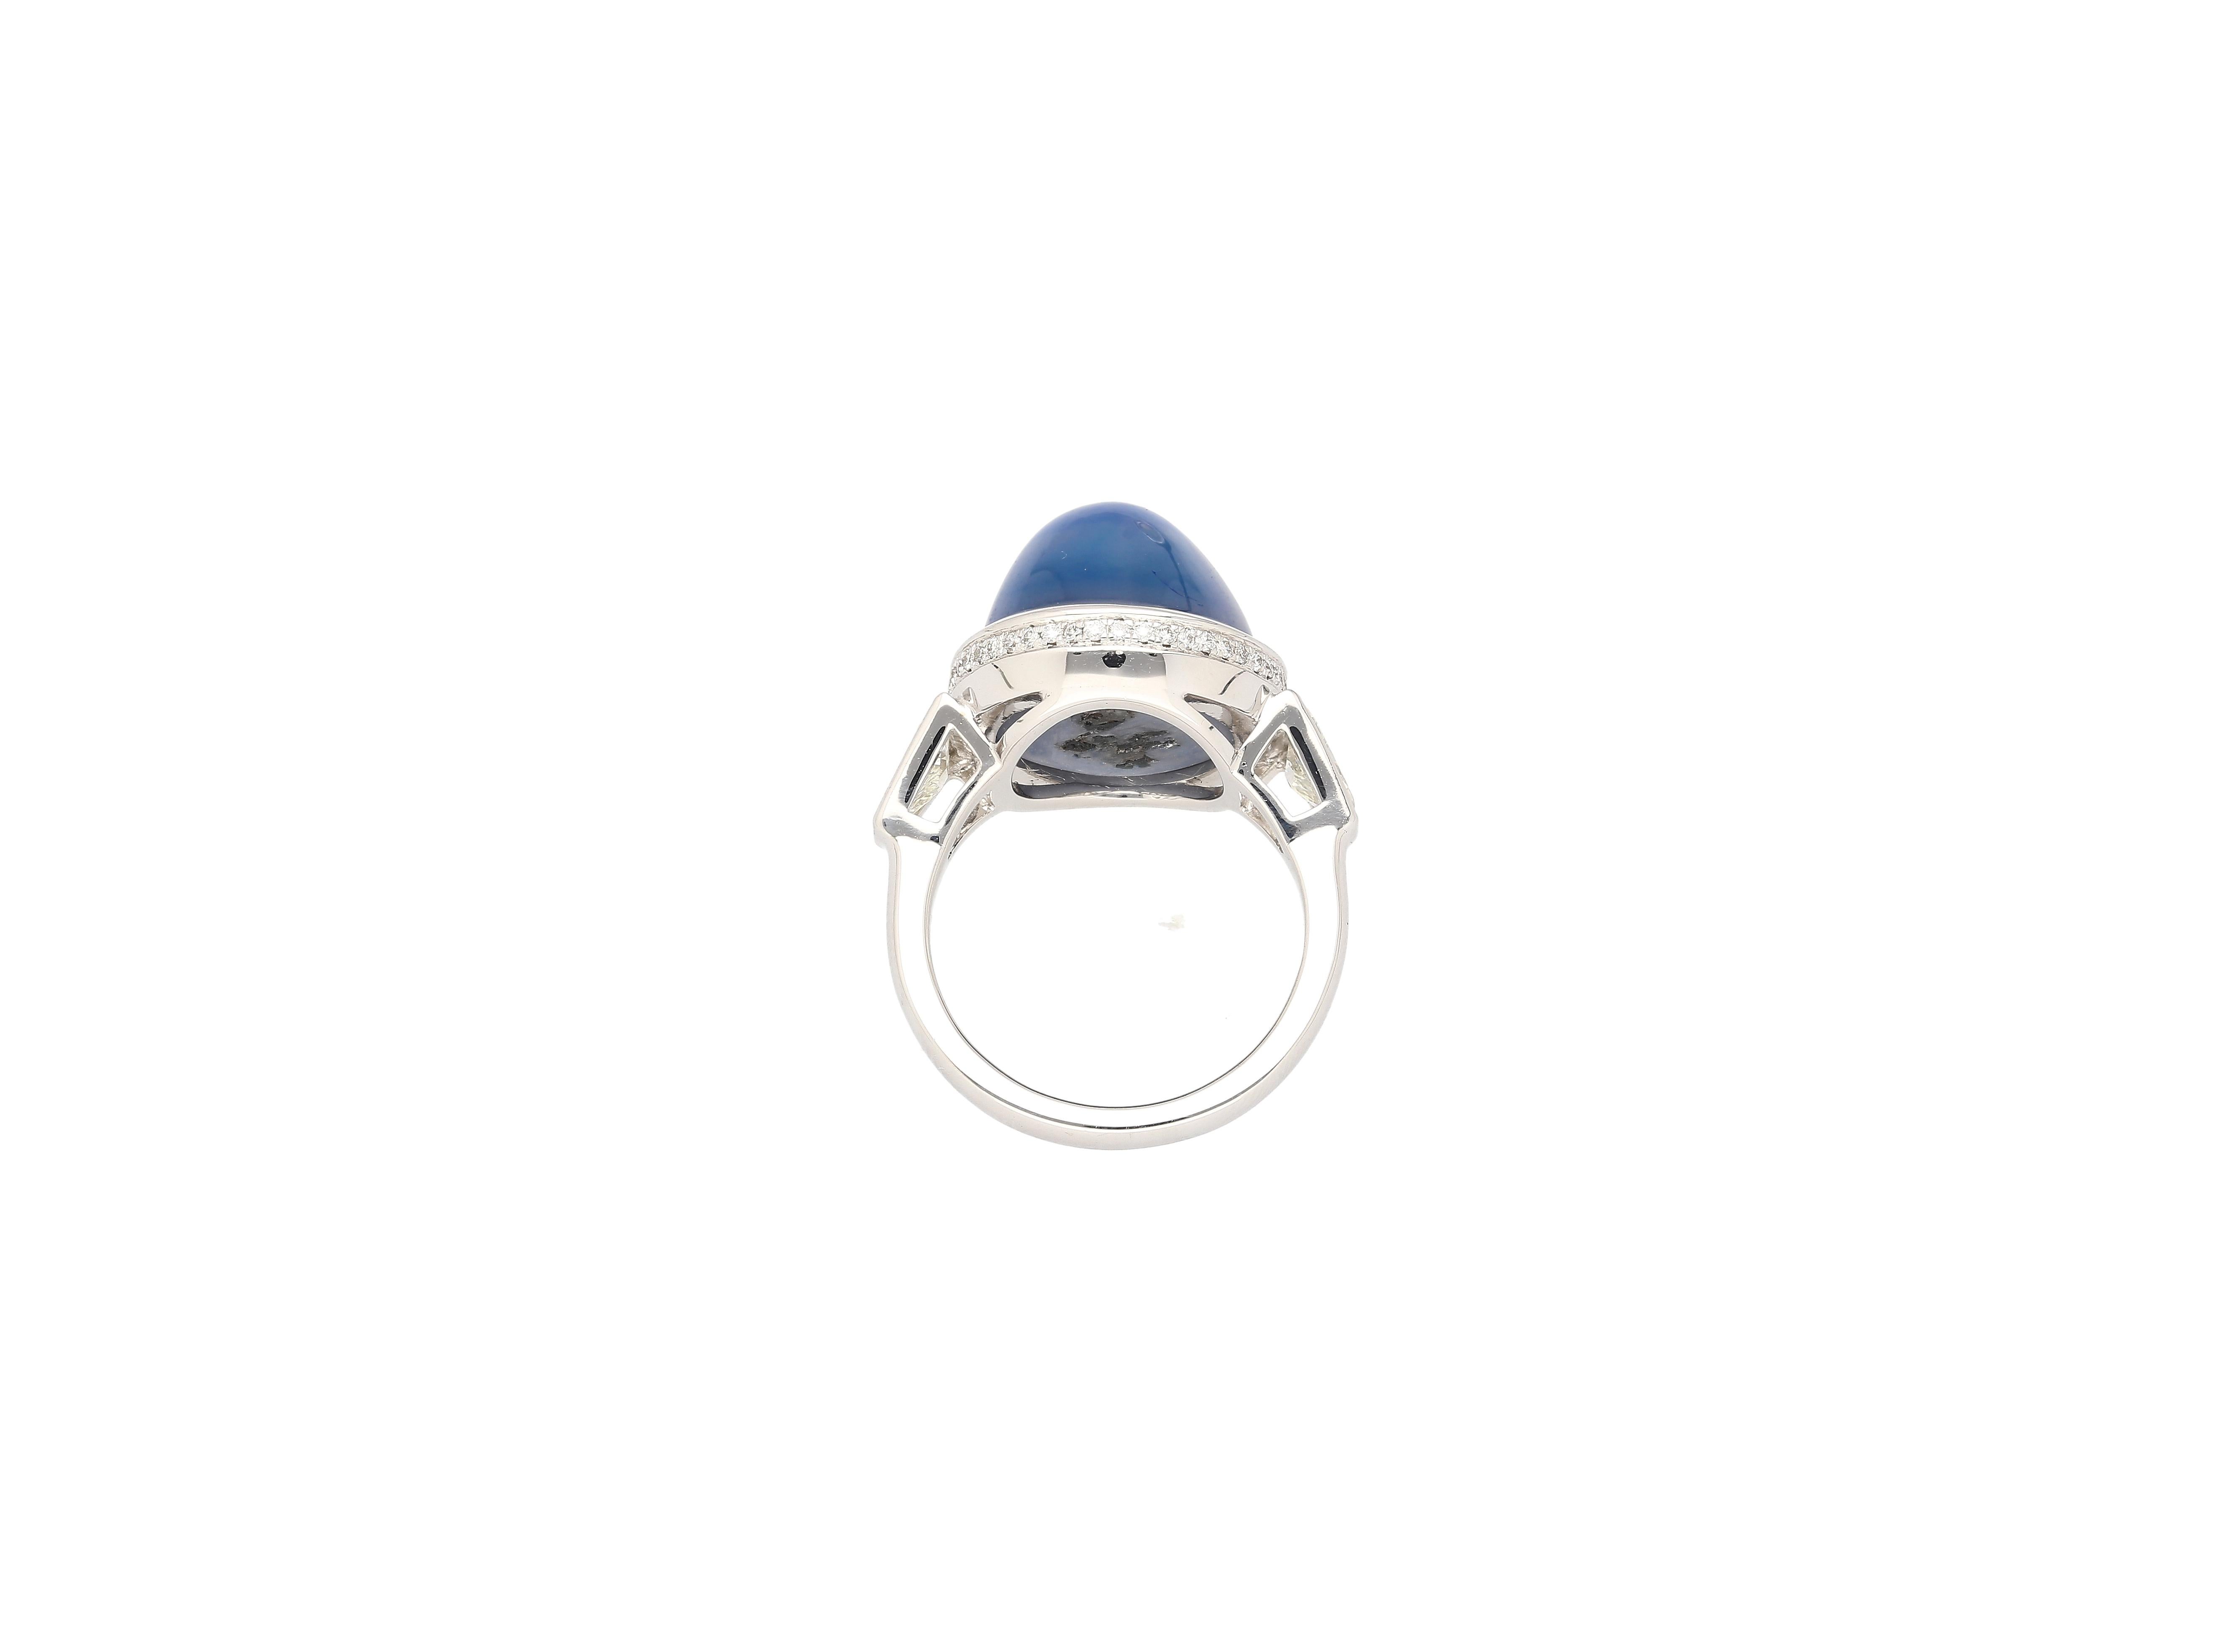 GRS certified 23.28 carat cabochon cut Blue Star Sapphire and diamond ring in 18k white gold. Set with 2 trapezoid cut diamond side stones, and a round cut diamond hidden halo. Offering the aesthetic of a vintage bezel setting, while displaying a